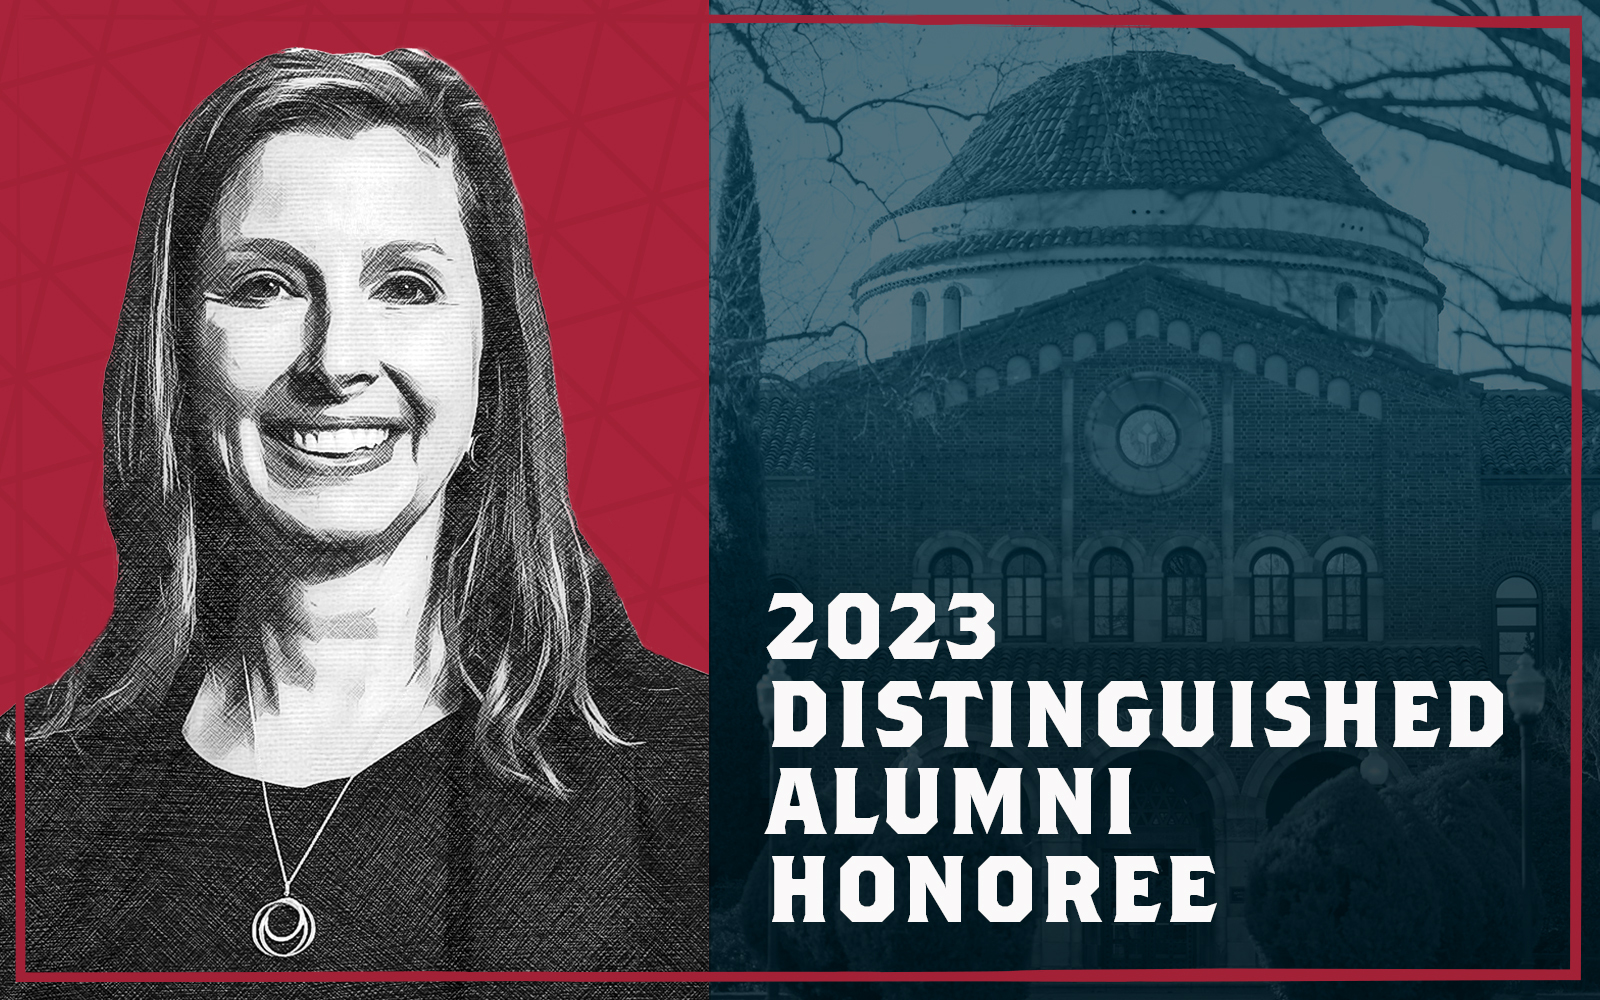 Photo of Marti Sutton, alongside an image of Kendall Hall and the phrase "2023 Distinguished Alumni Honoree"